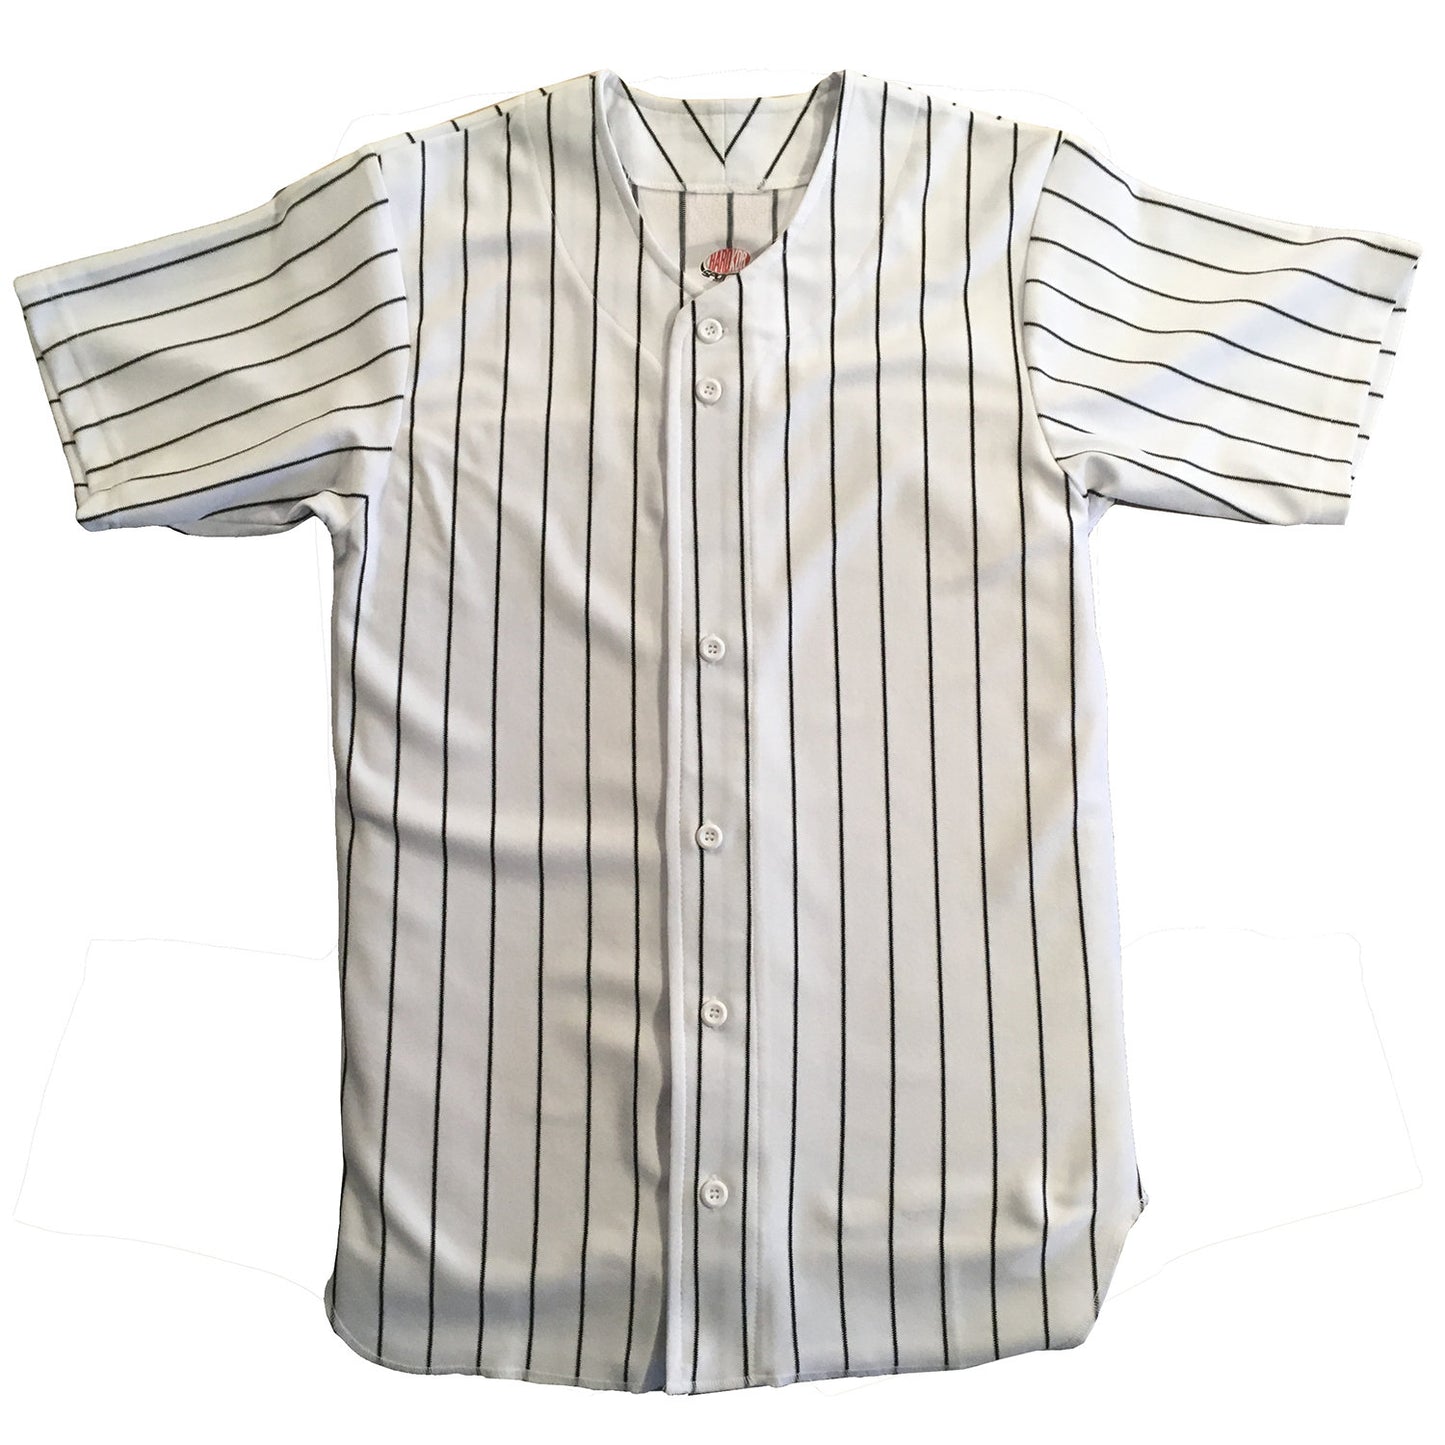 Customized Pinstriped Baseball Jersey| Full Button Down, Grey with Black Pinstripes Personalized Jersey with your Team, Player, Numbers